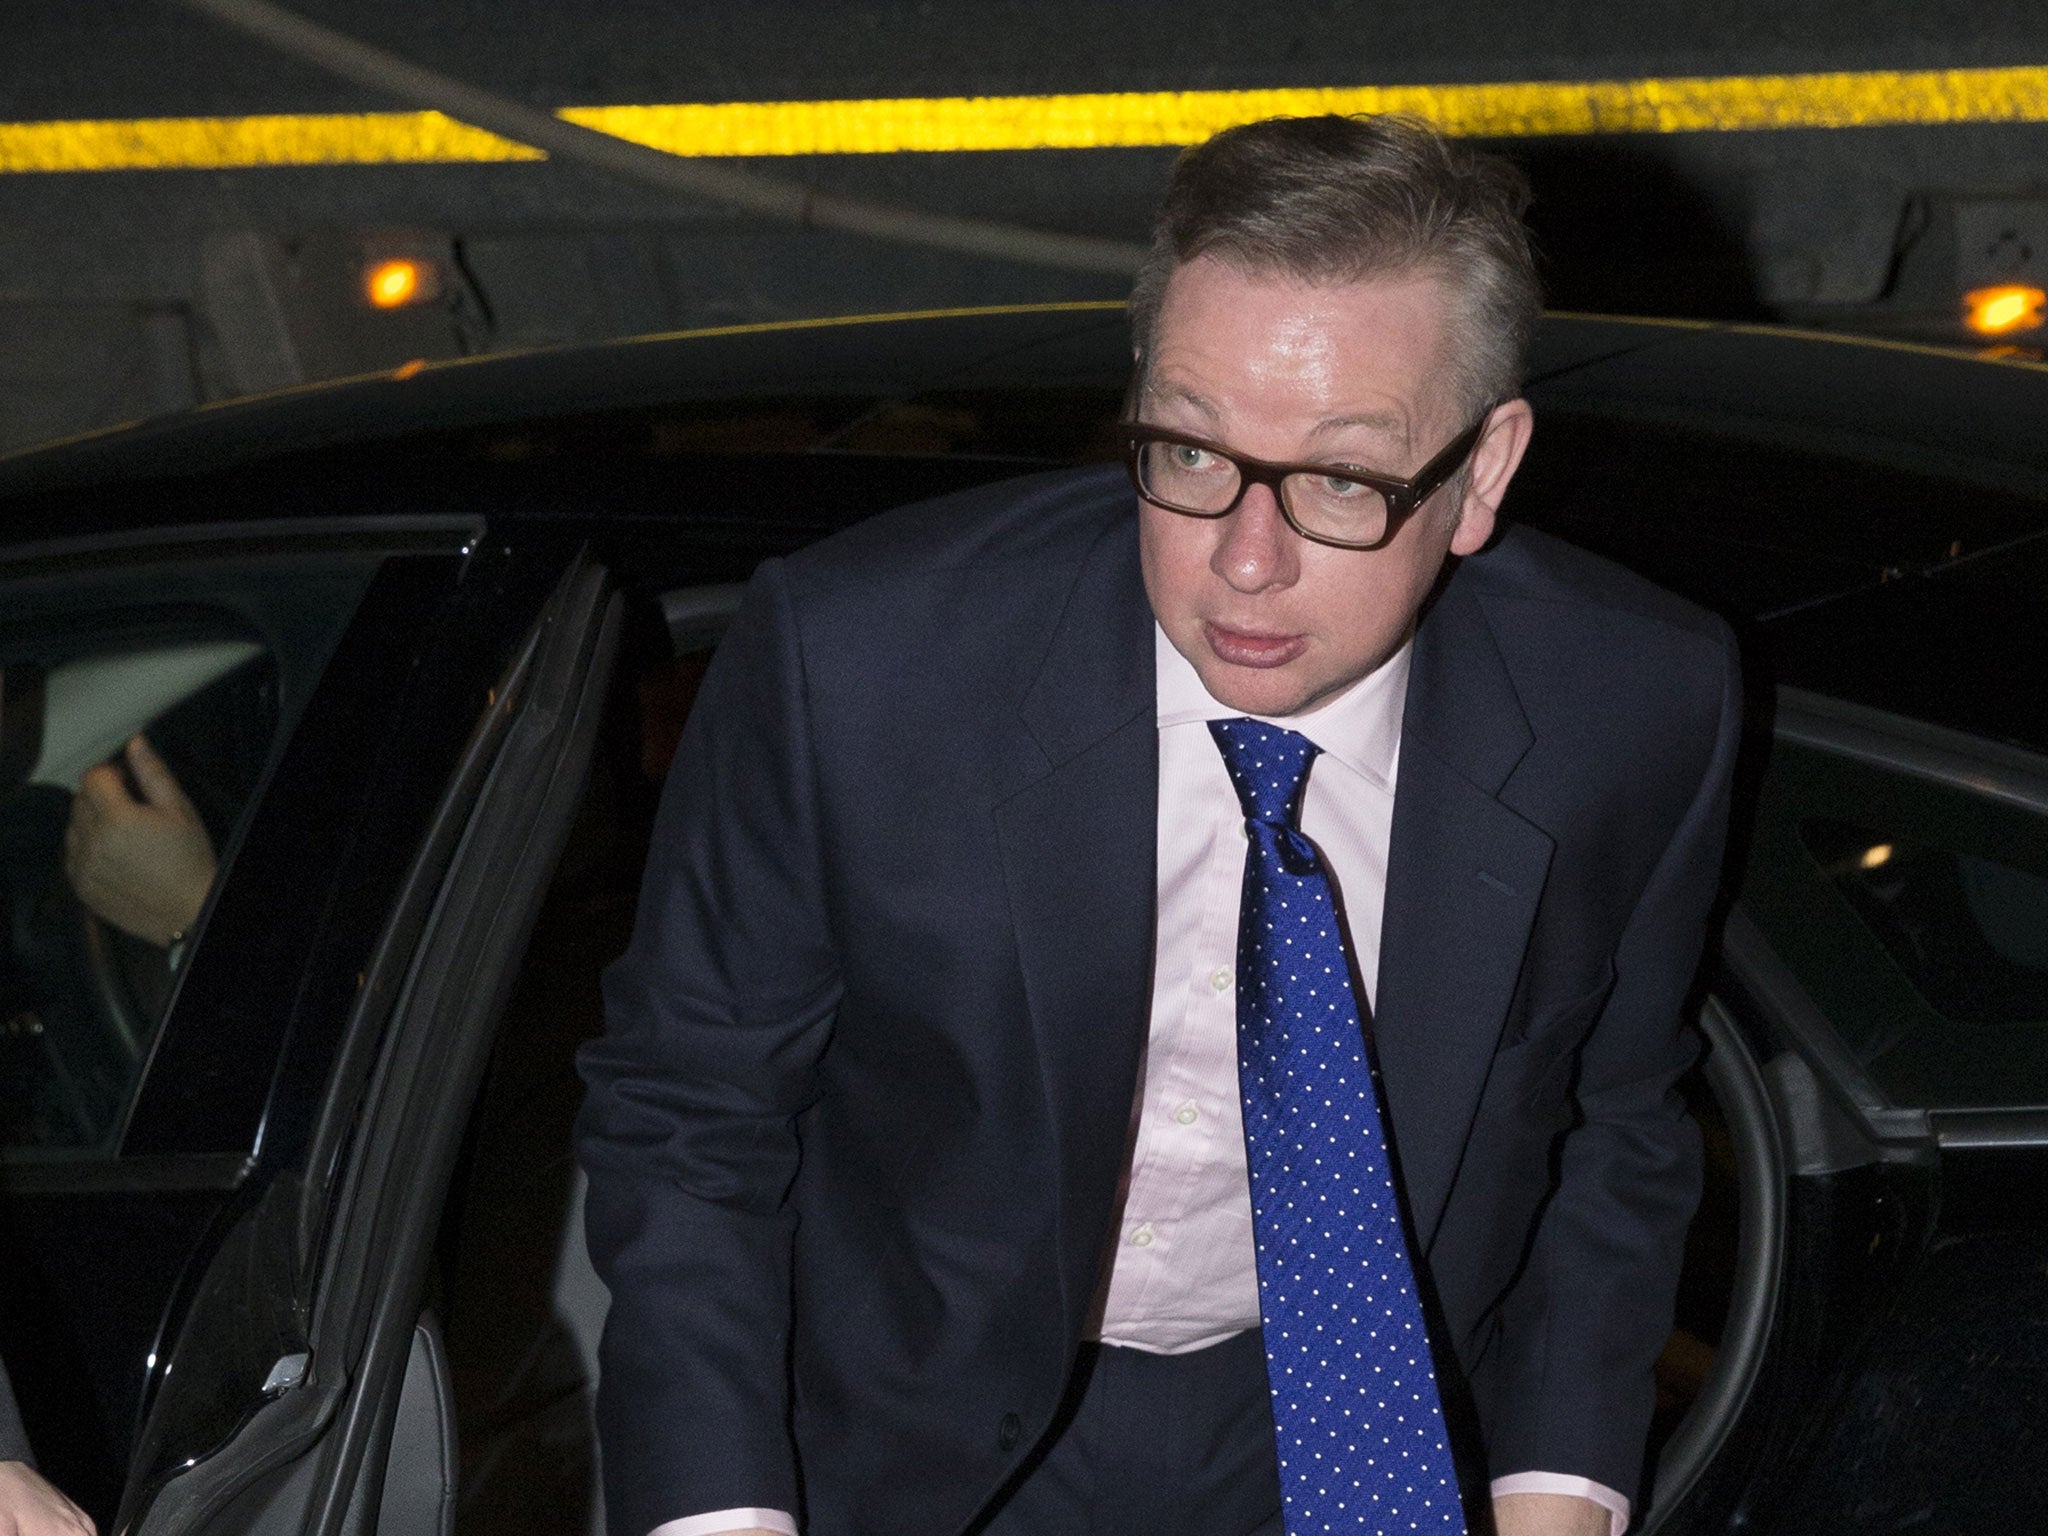 Michael Gove suffered a major setback in his plans to change teachers' contracts